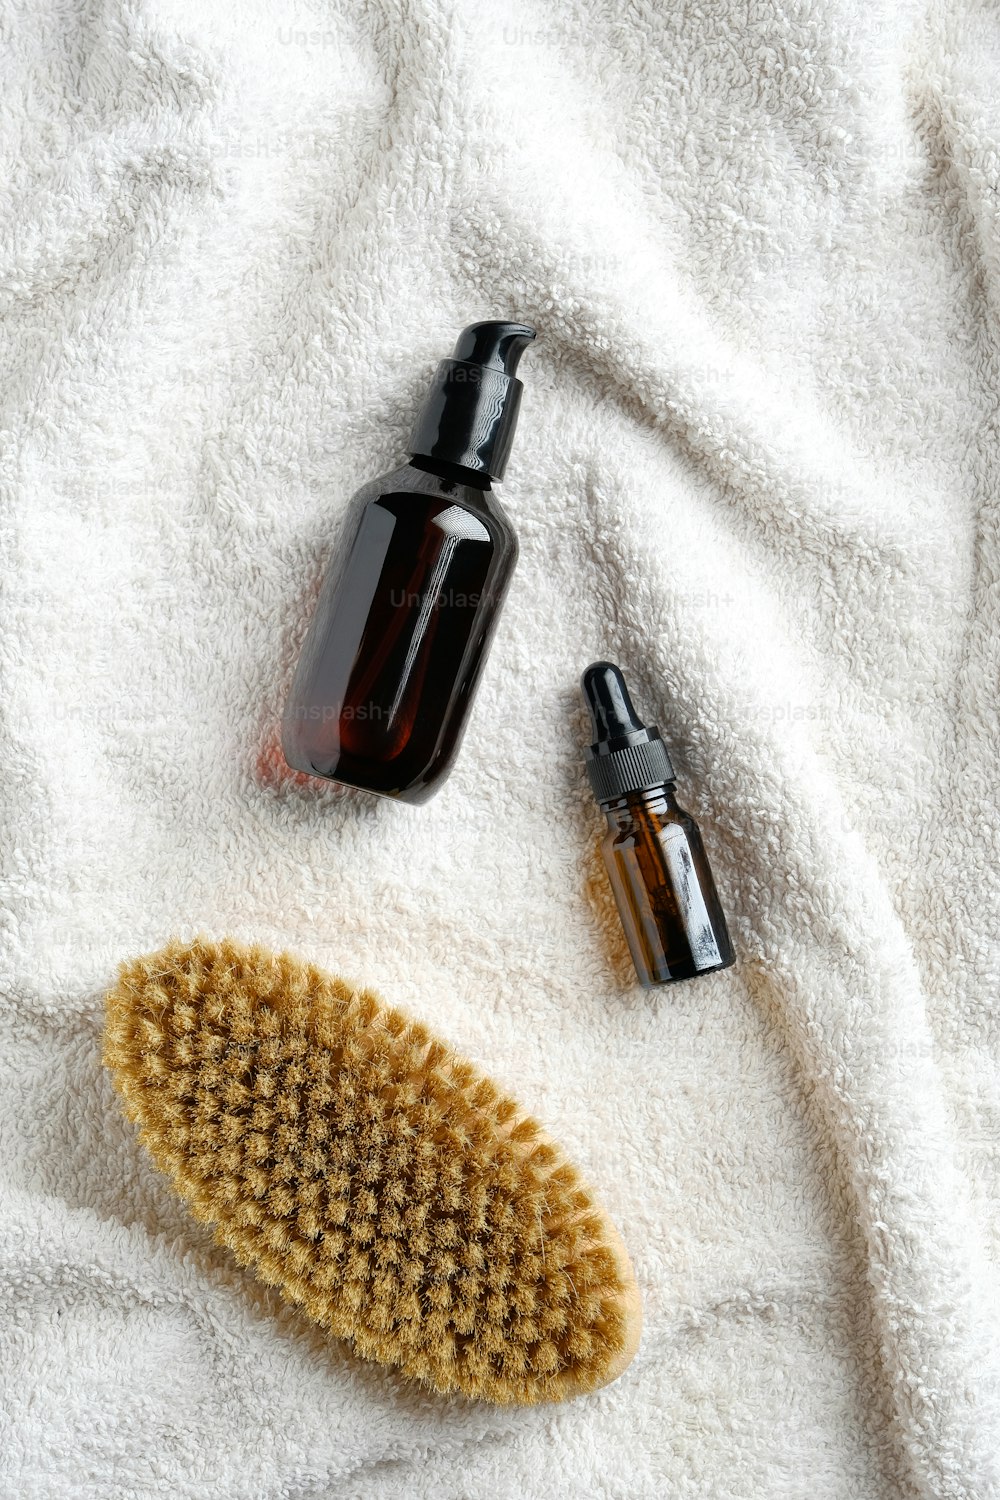 Dry brush and essential oils on white towel in bathroom. Body care, cellulite treatment concept.